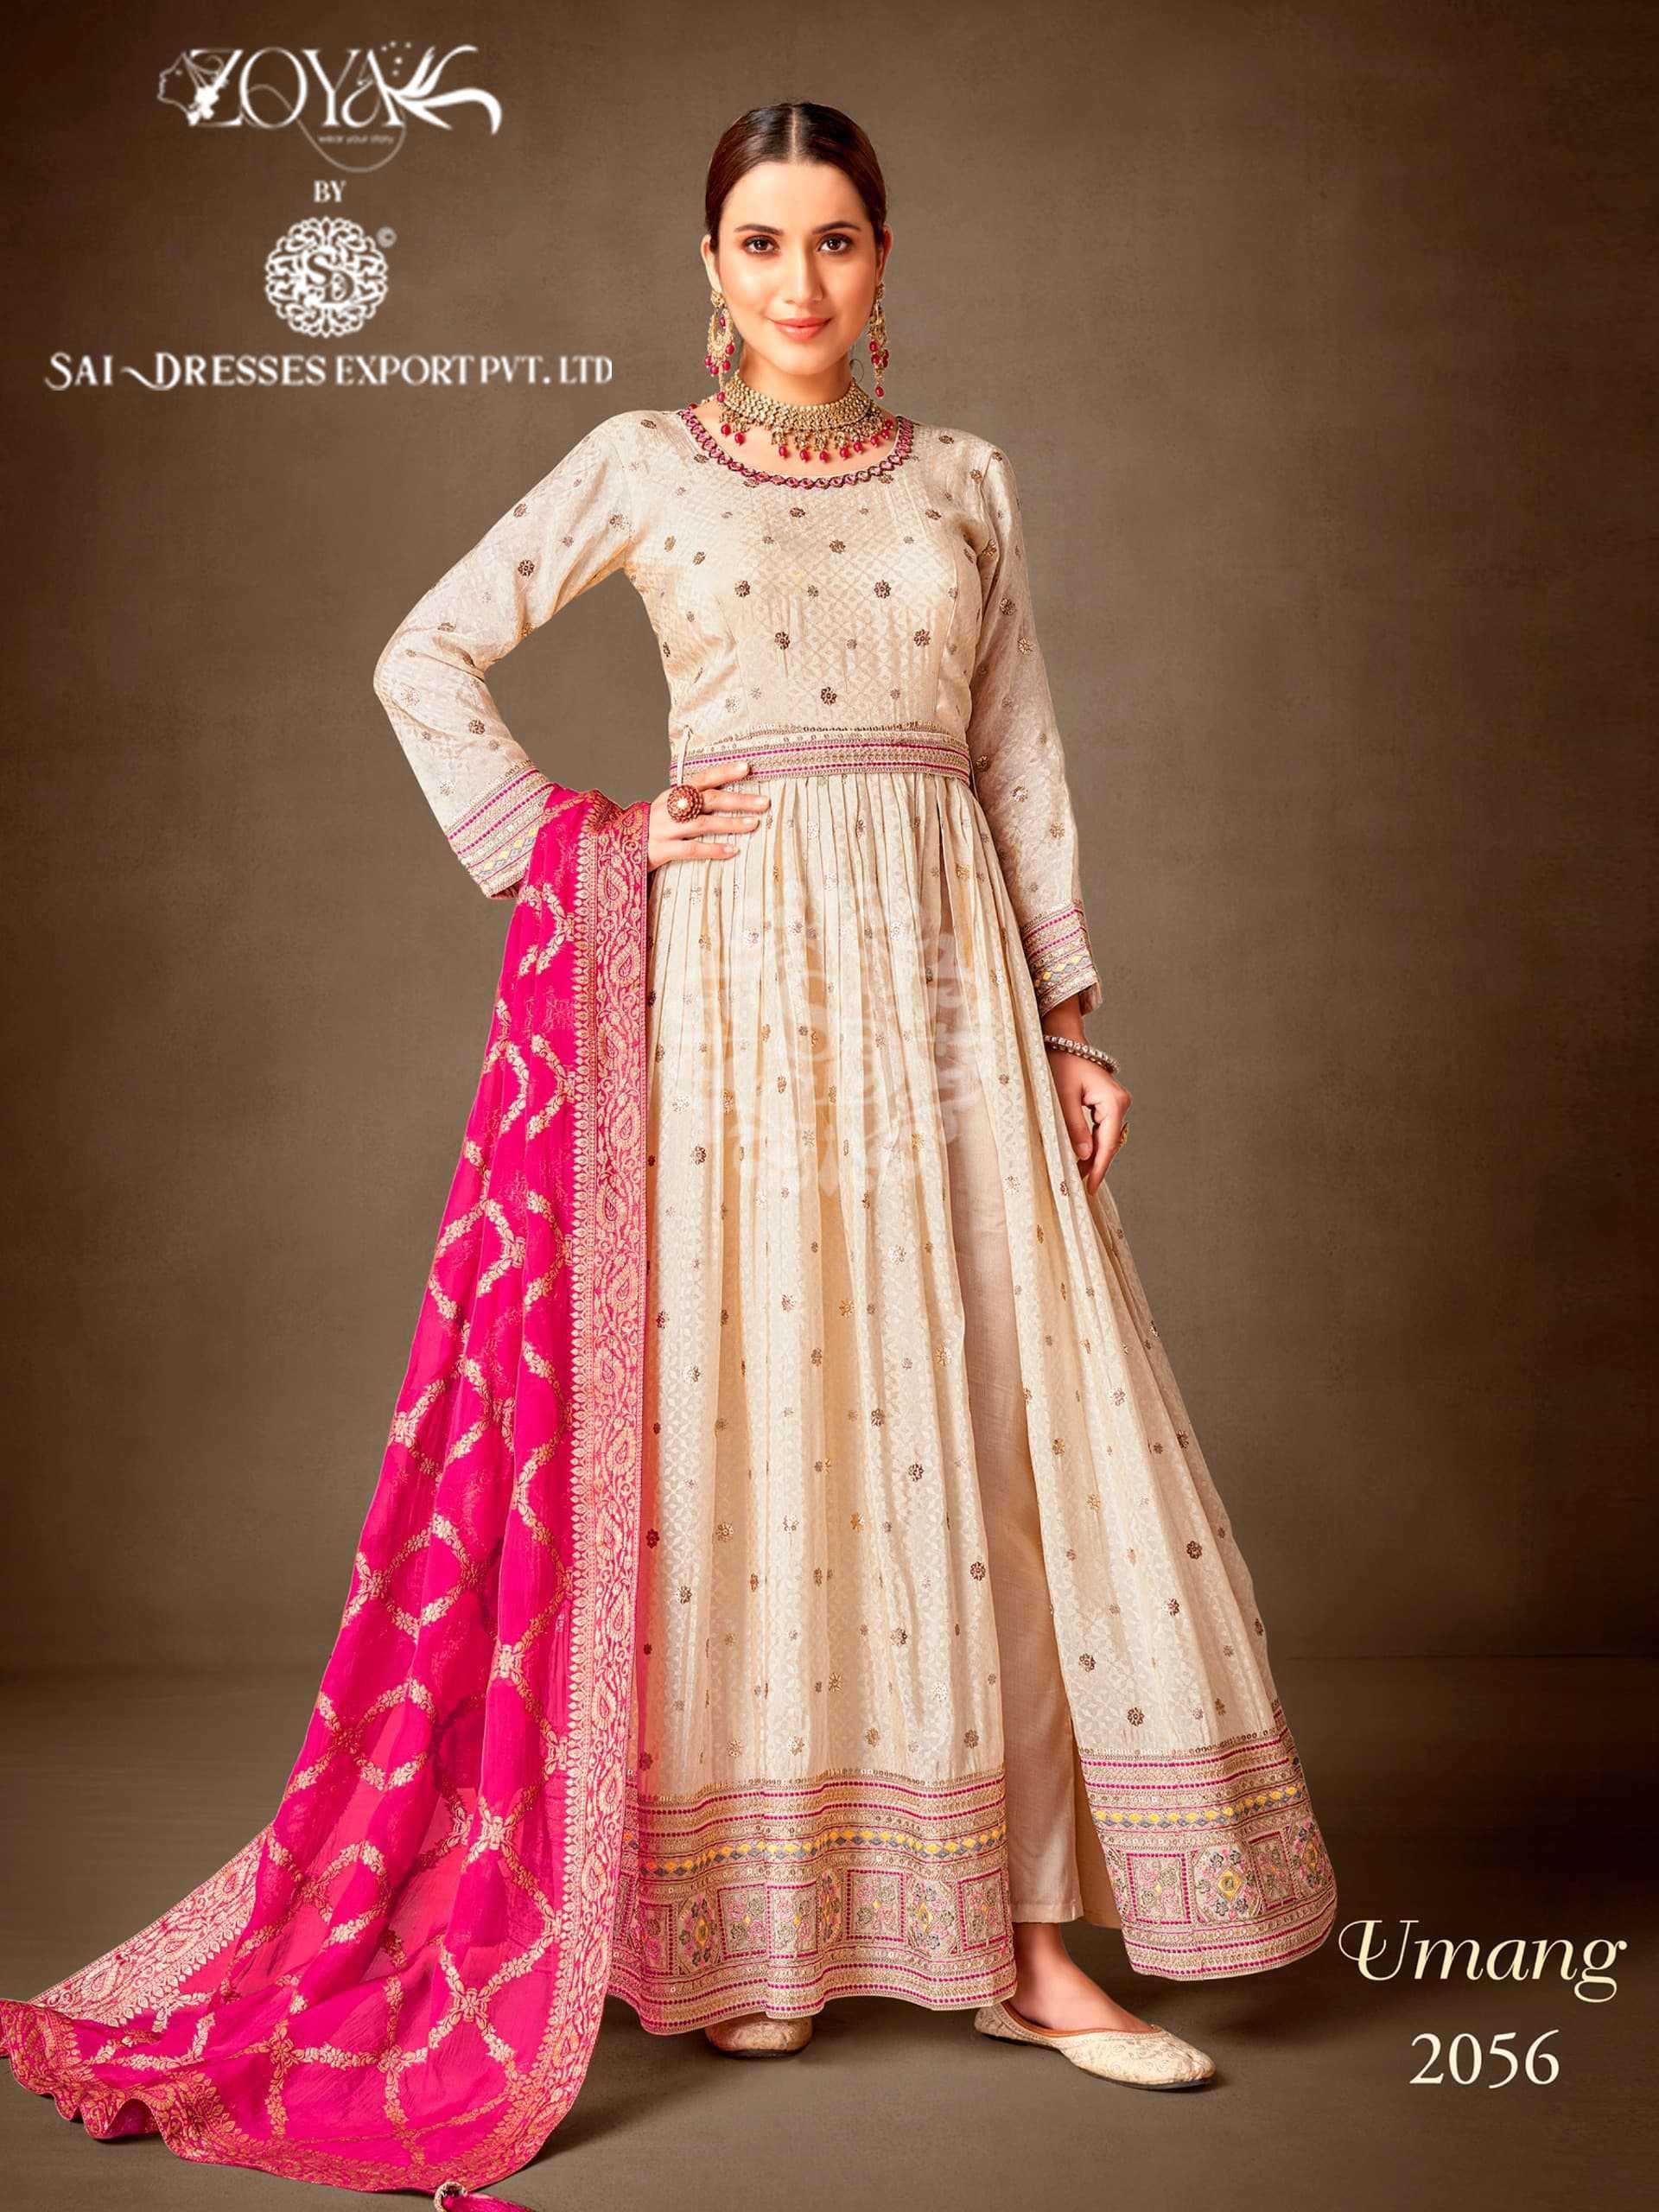 SAI DRESSES PRESENT UMANG READYMADE CLASSY WEAR BEAUTIFUL HEAVY LONG DESIGNER SUITS IN WHOLESALE RATE IN SURAT